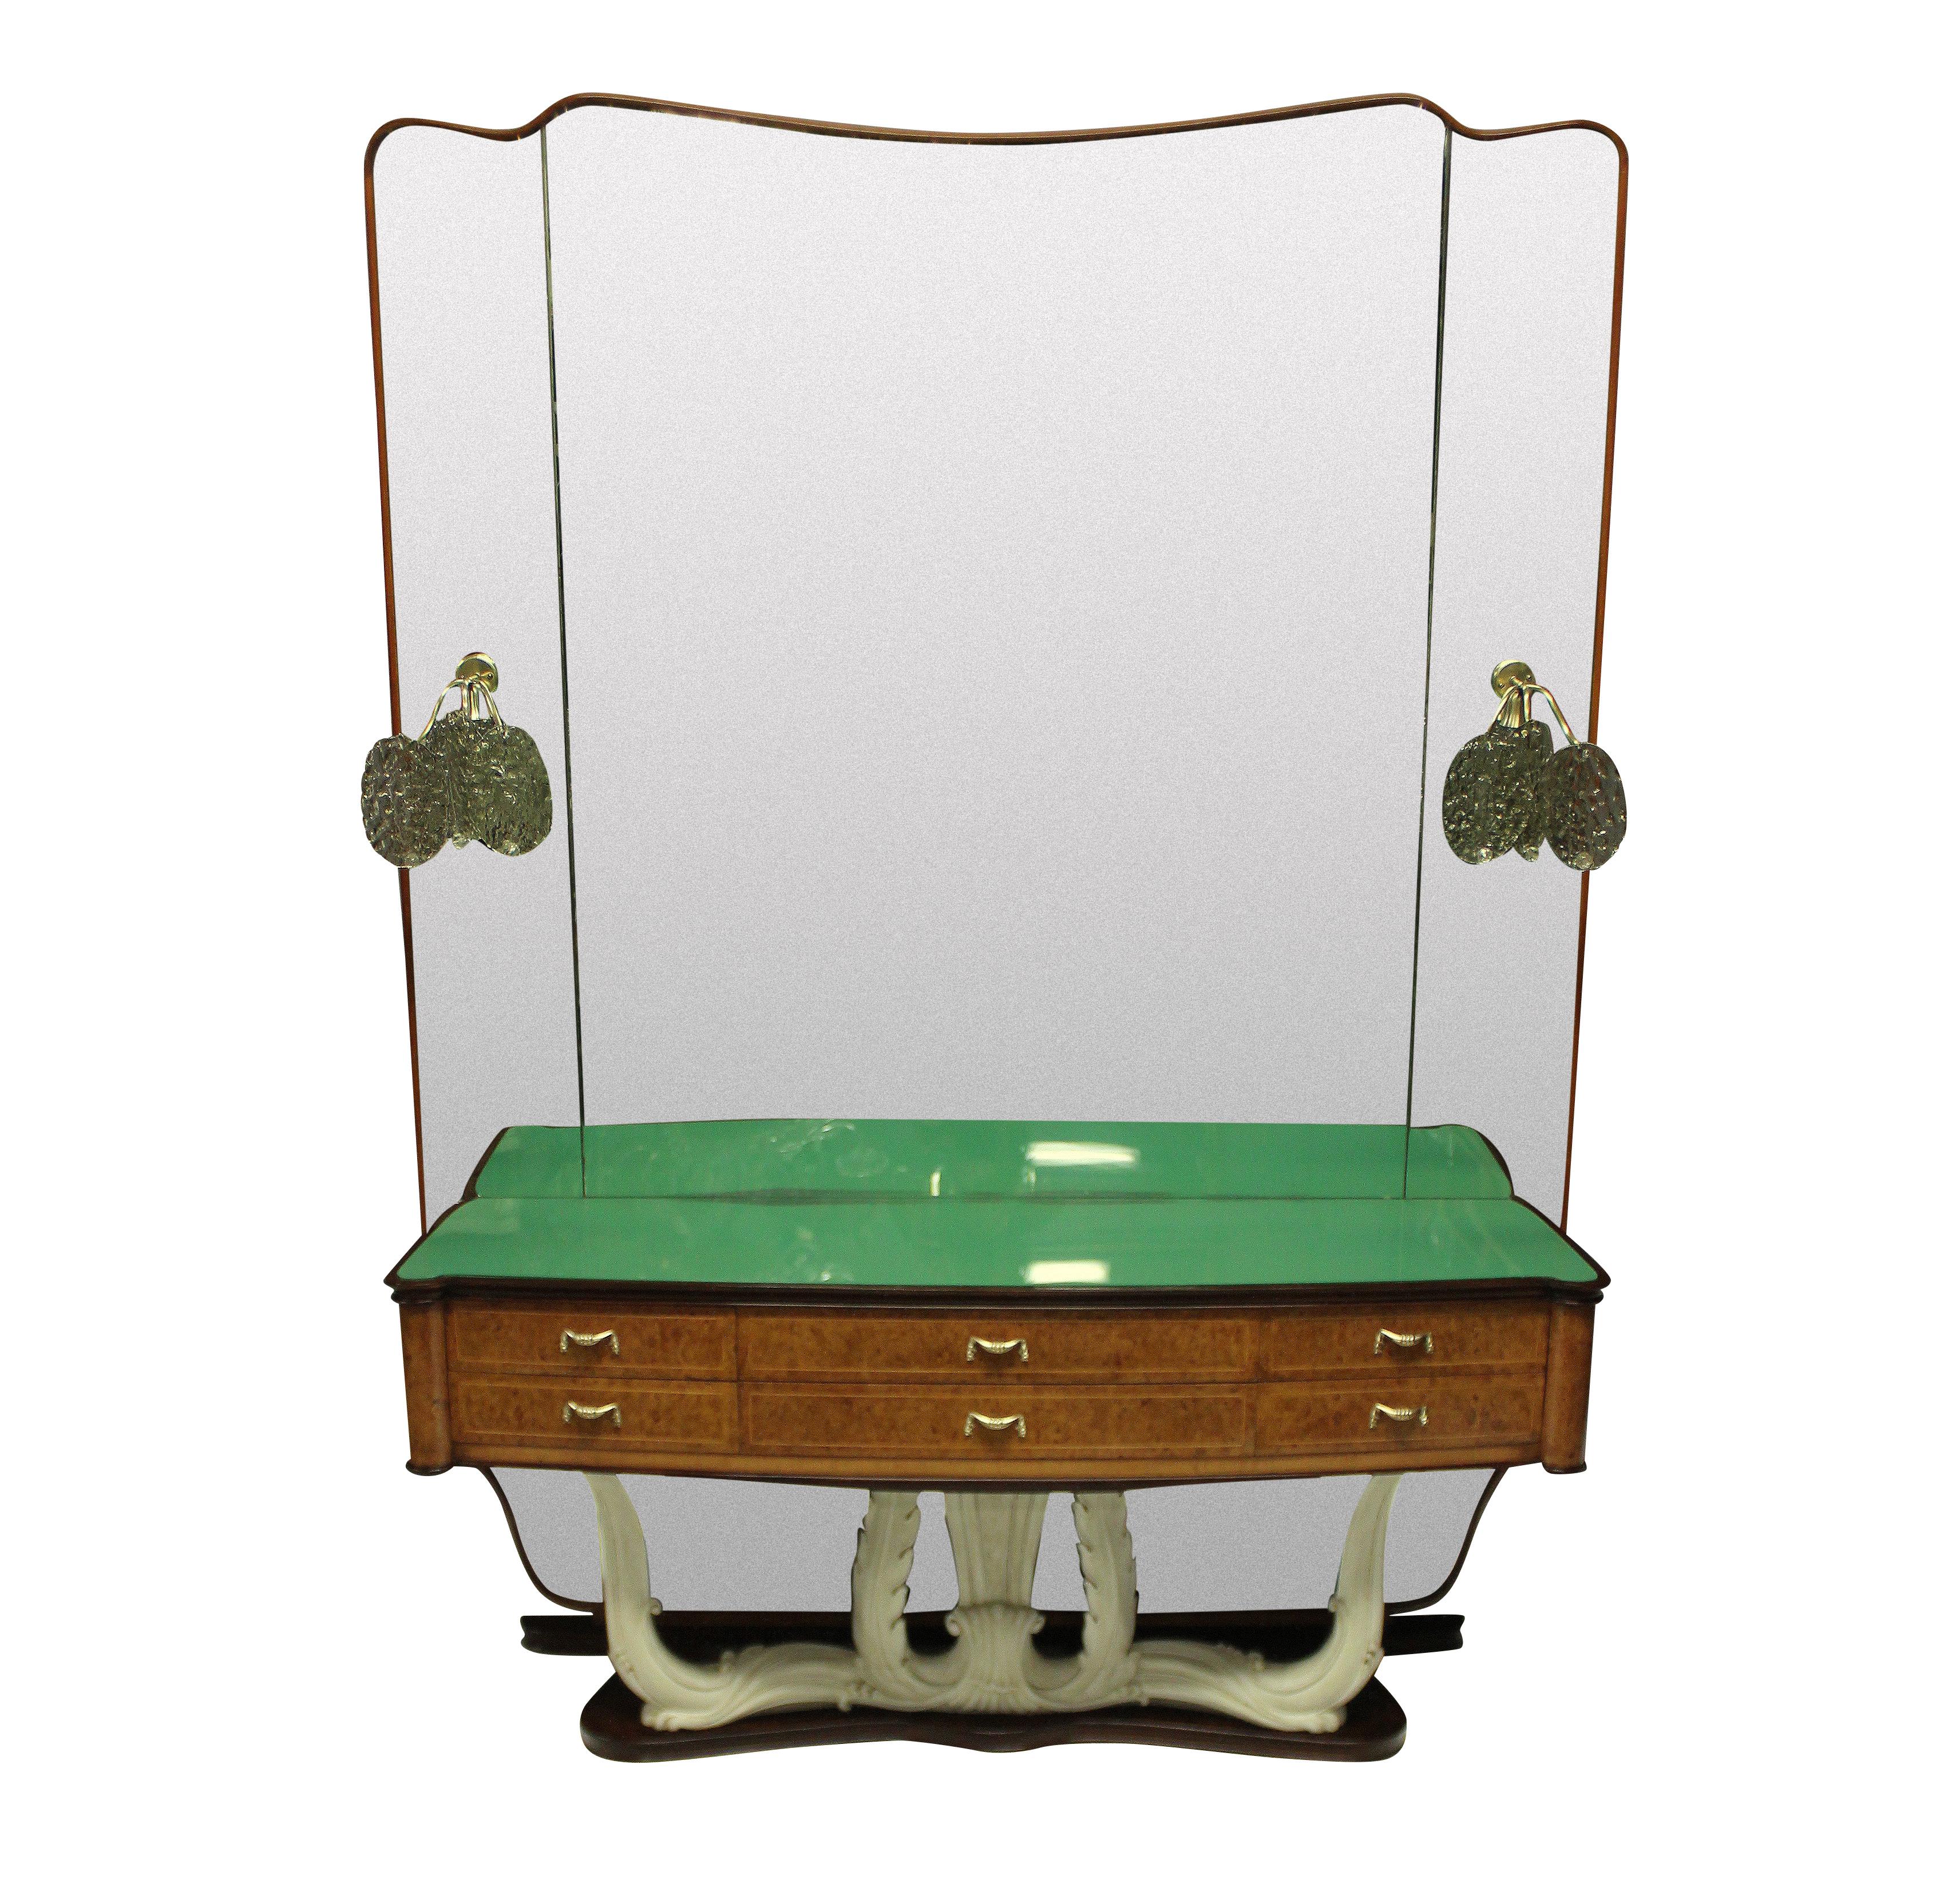 A stylish Italian Mid-Century hall console with full length mirror with sconces. The console with six drawers in walnut root, with brass handles, a carved faux ivory base and its original green glass inset top. The mirror is framed in walnut and has